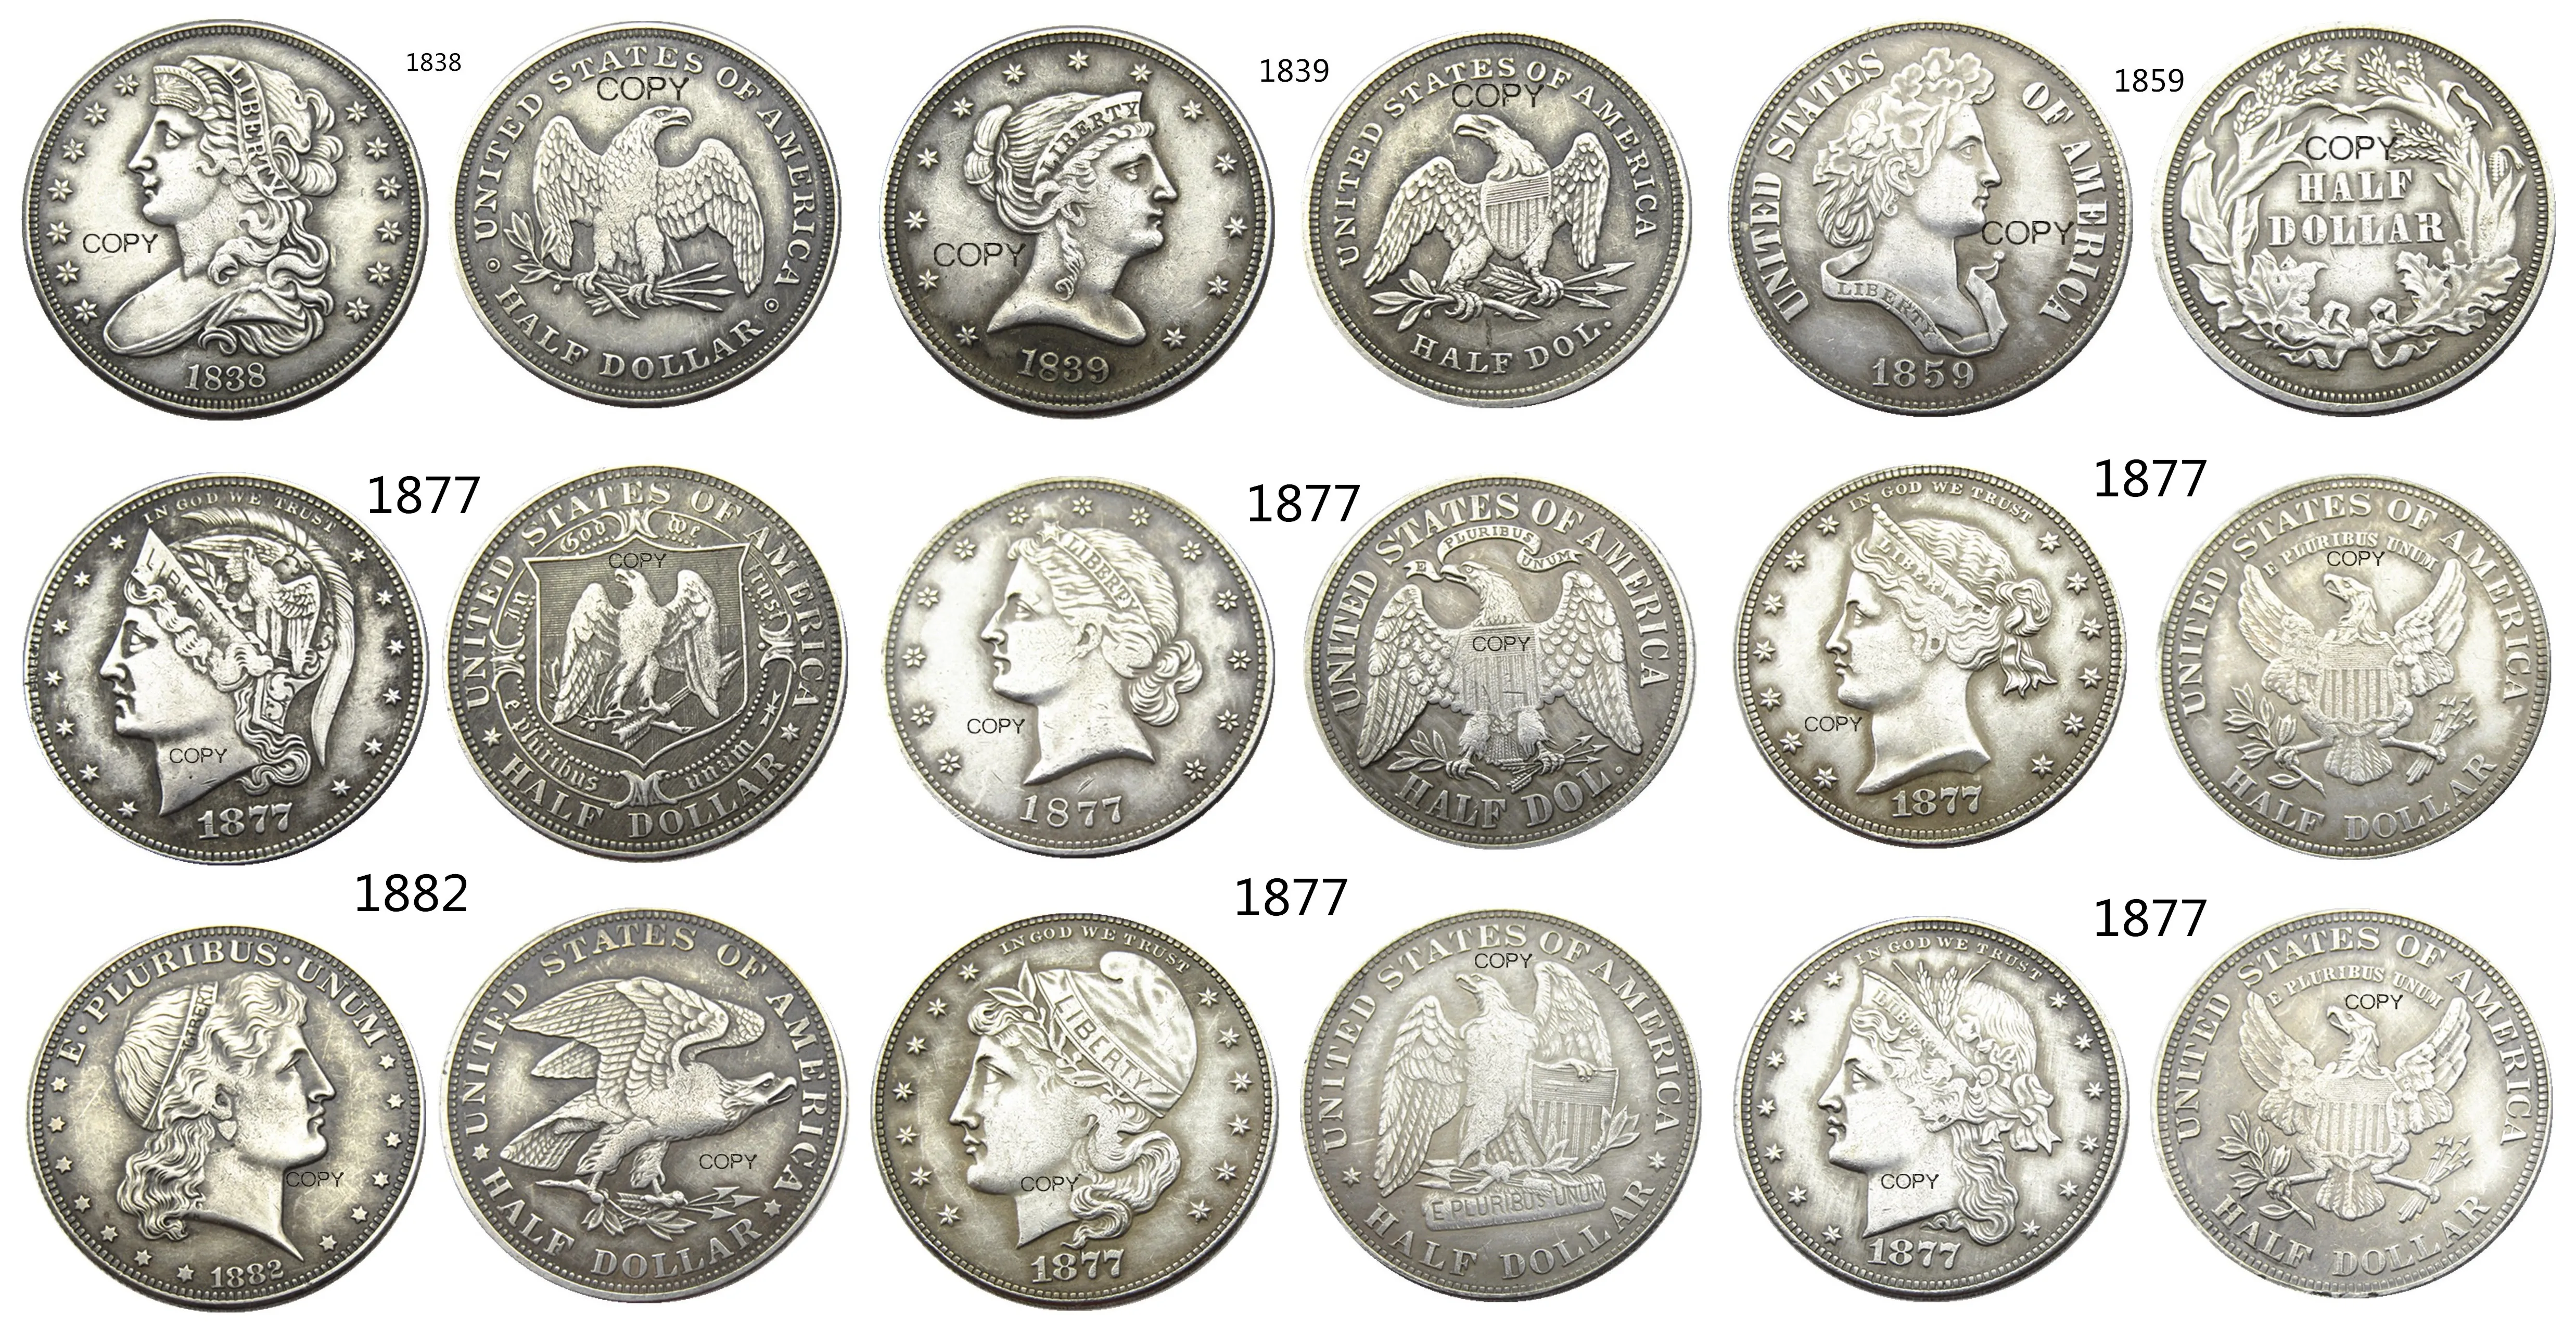 USA A Set Of(1838-1882) 9pcs Different Head Half Dollar Patterns Craft Silver Plated Copy Coin Ornaments replica coins home decoration accessories